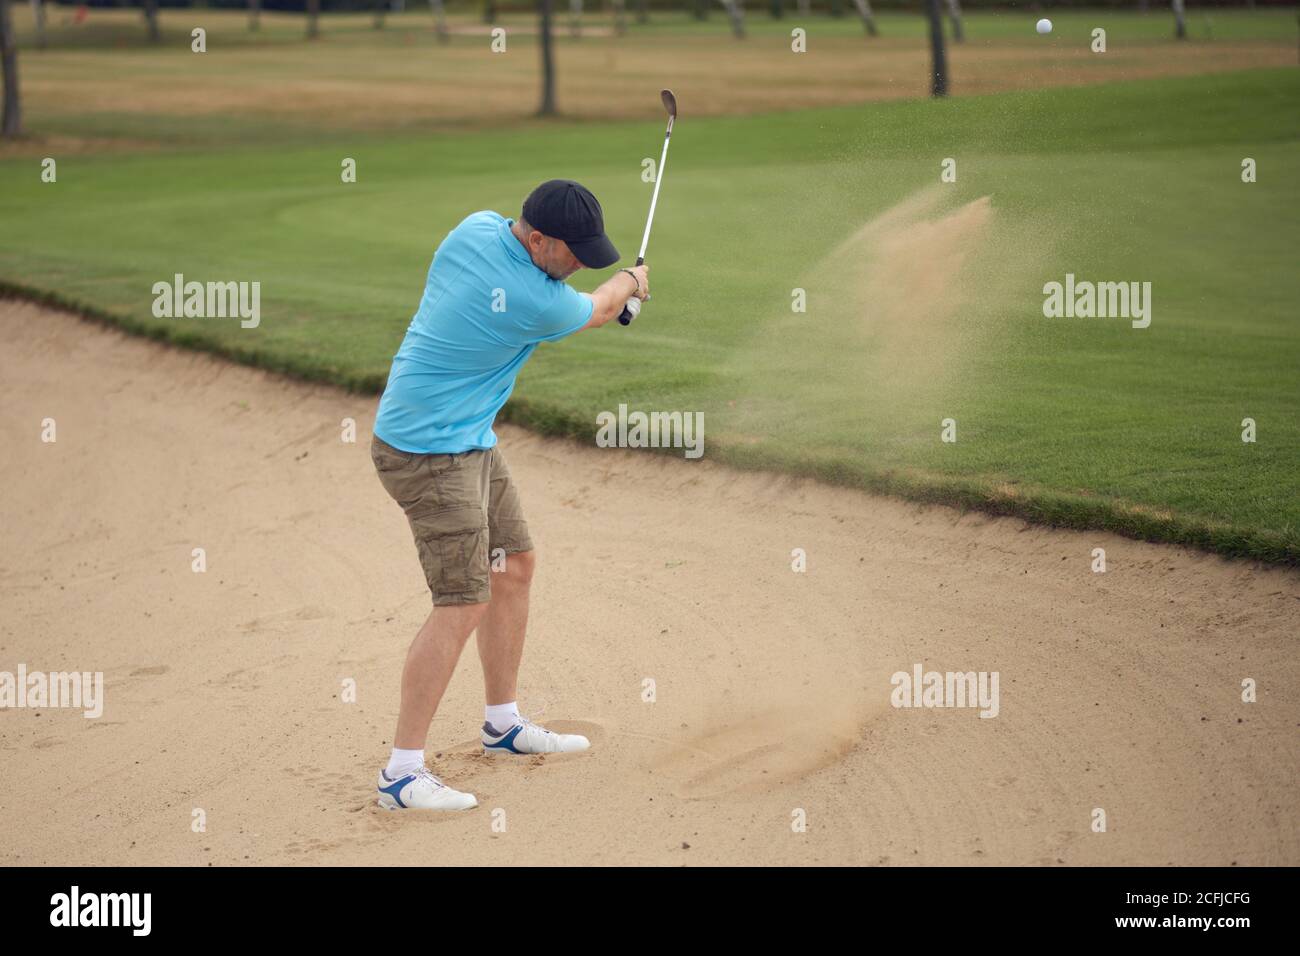 Golfer hitting his ball clear of the bunker or sand hazard in a puff of flying sand as he plays the shot onto the fairway Stock Photo